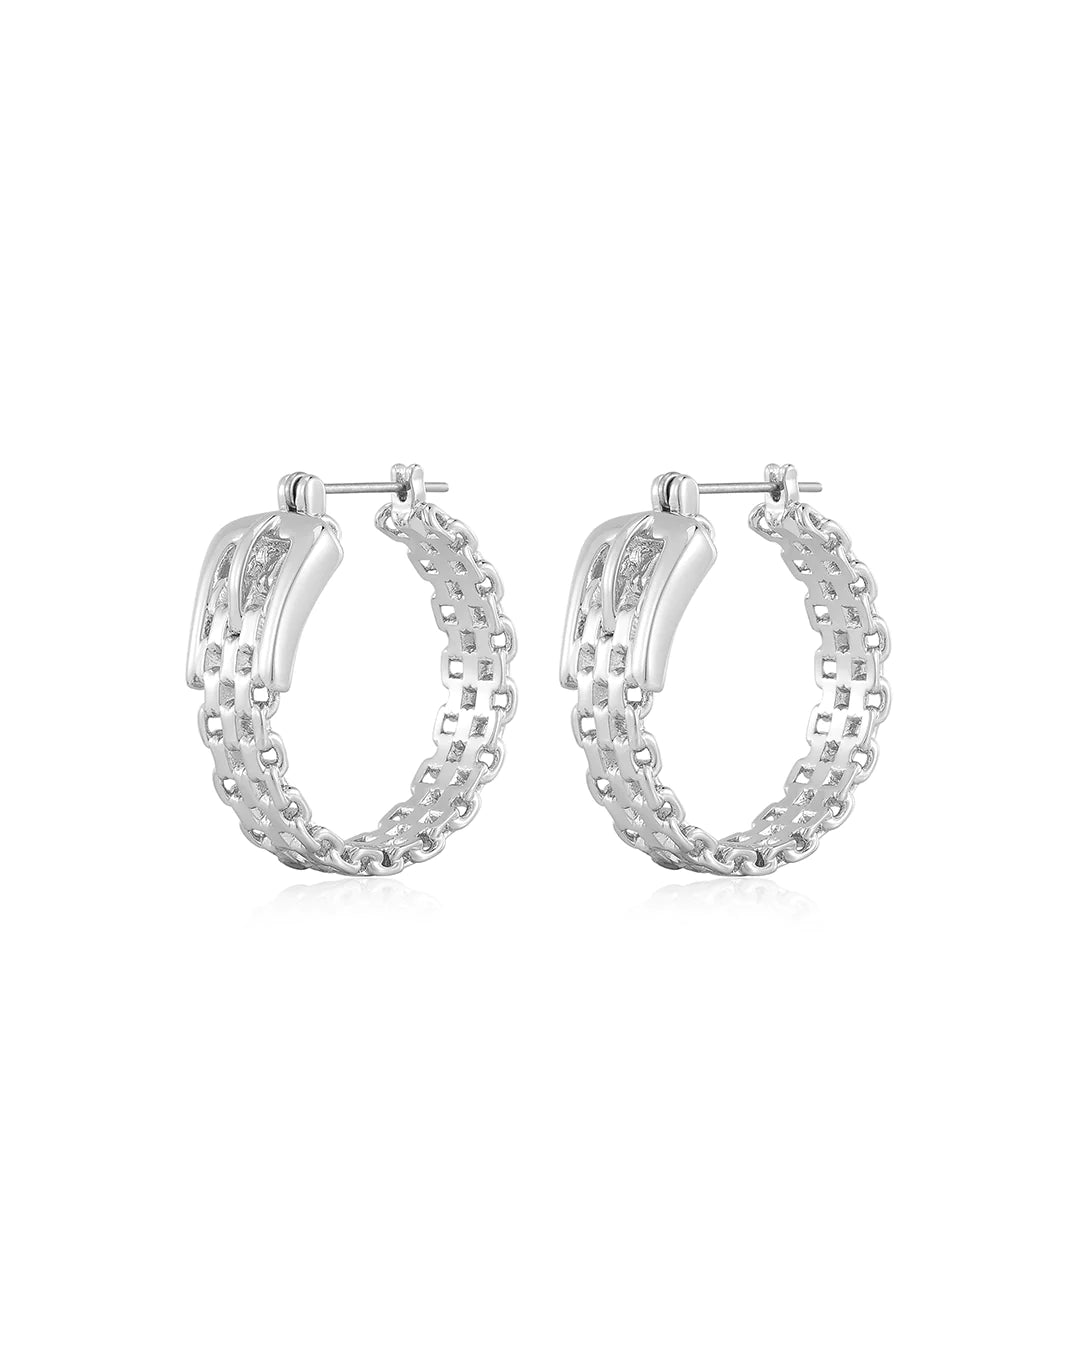 The Woven Buckle Hoops